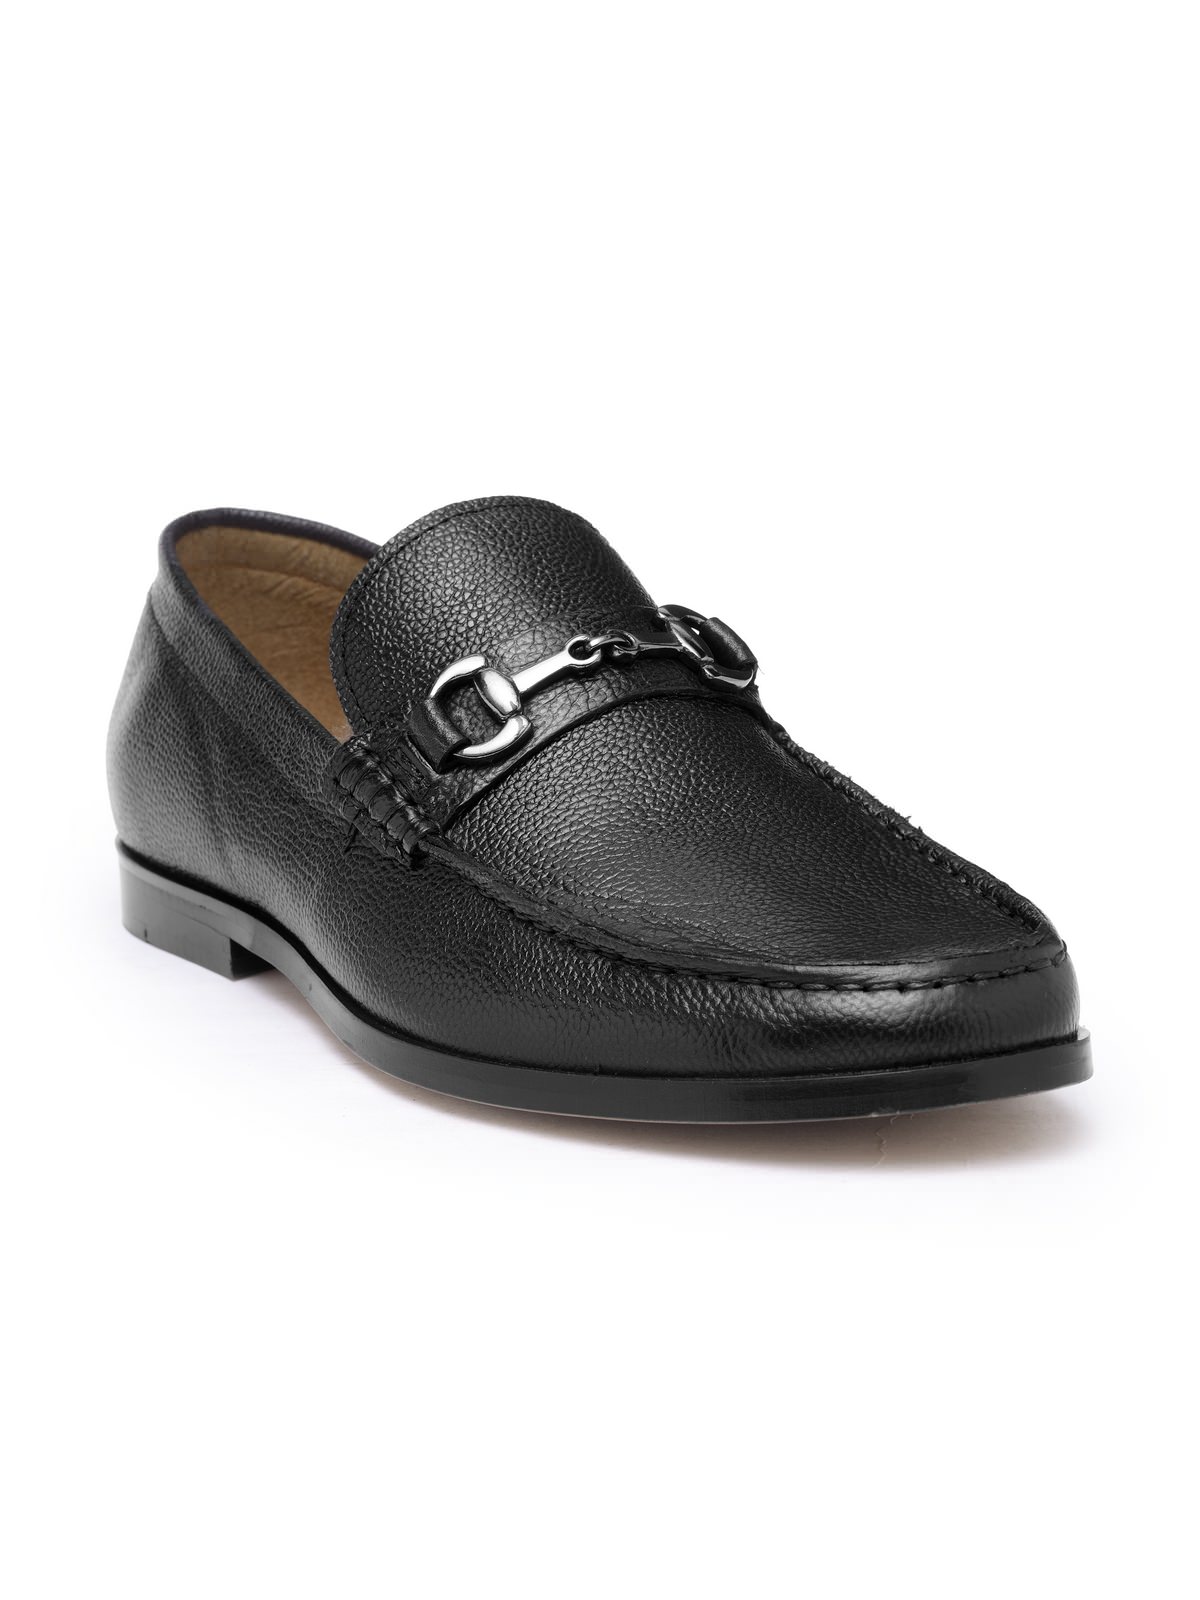 BLACK LEATHER LOAFERS FOR MEN | BUY ONLINE LOAFERS IN INDIA